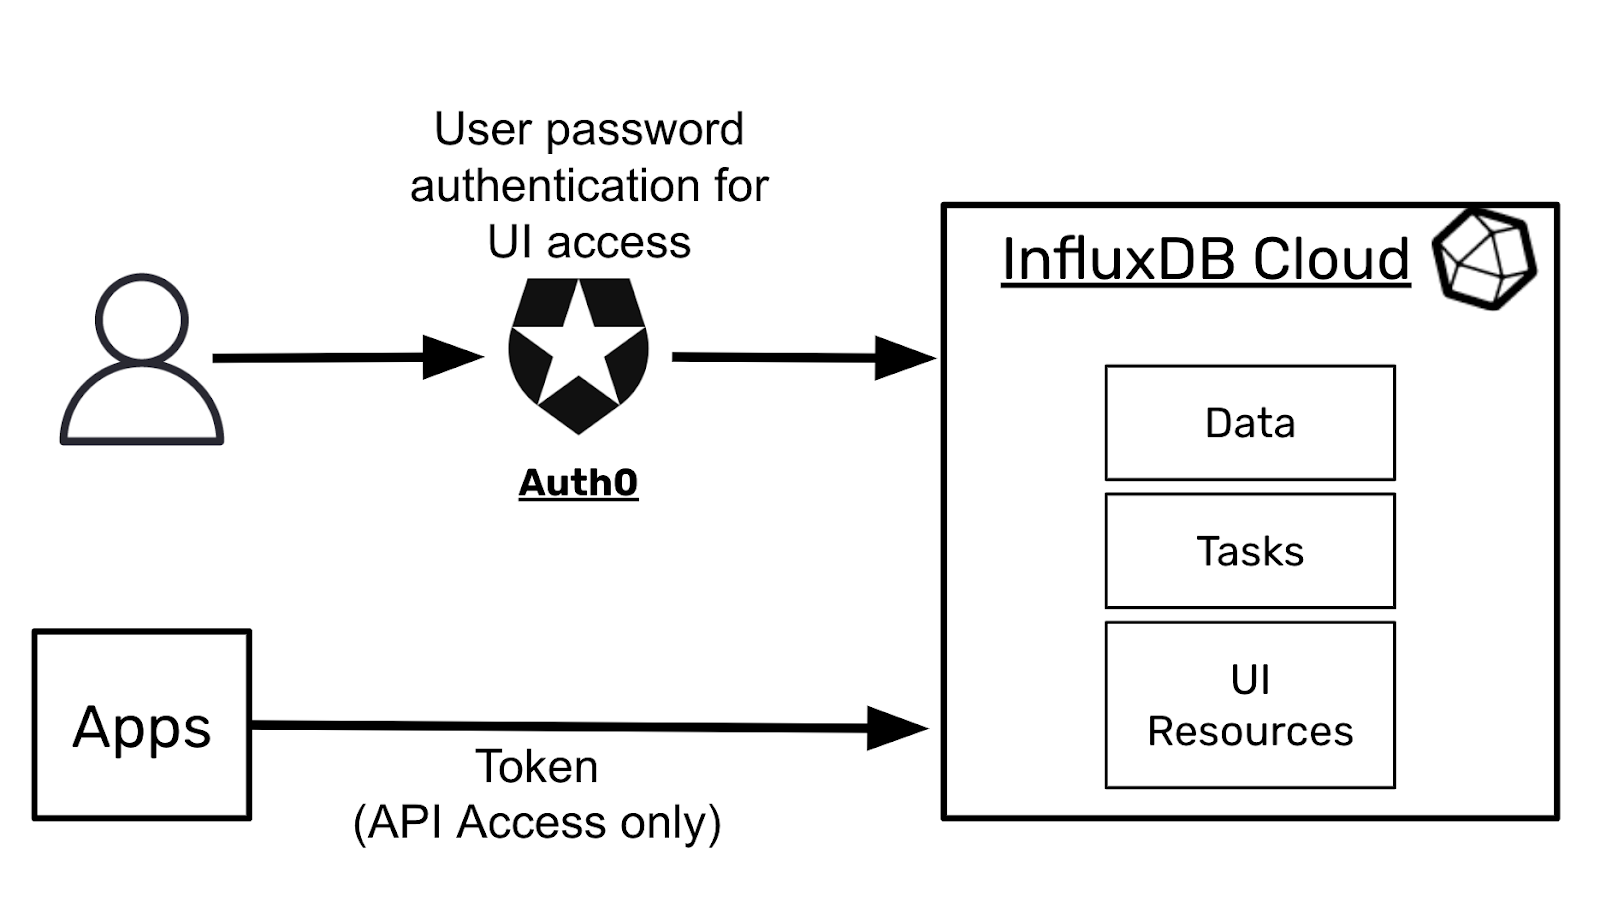 InfluxDB Cloud authentication and authorization